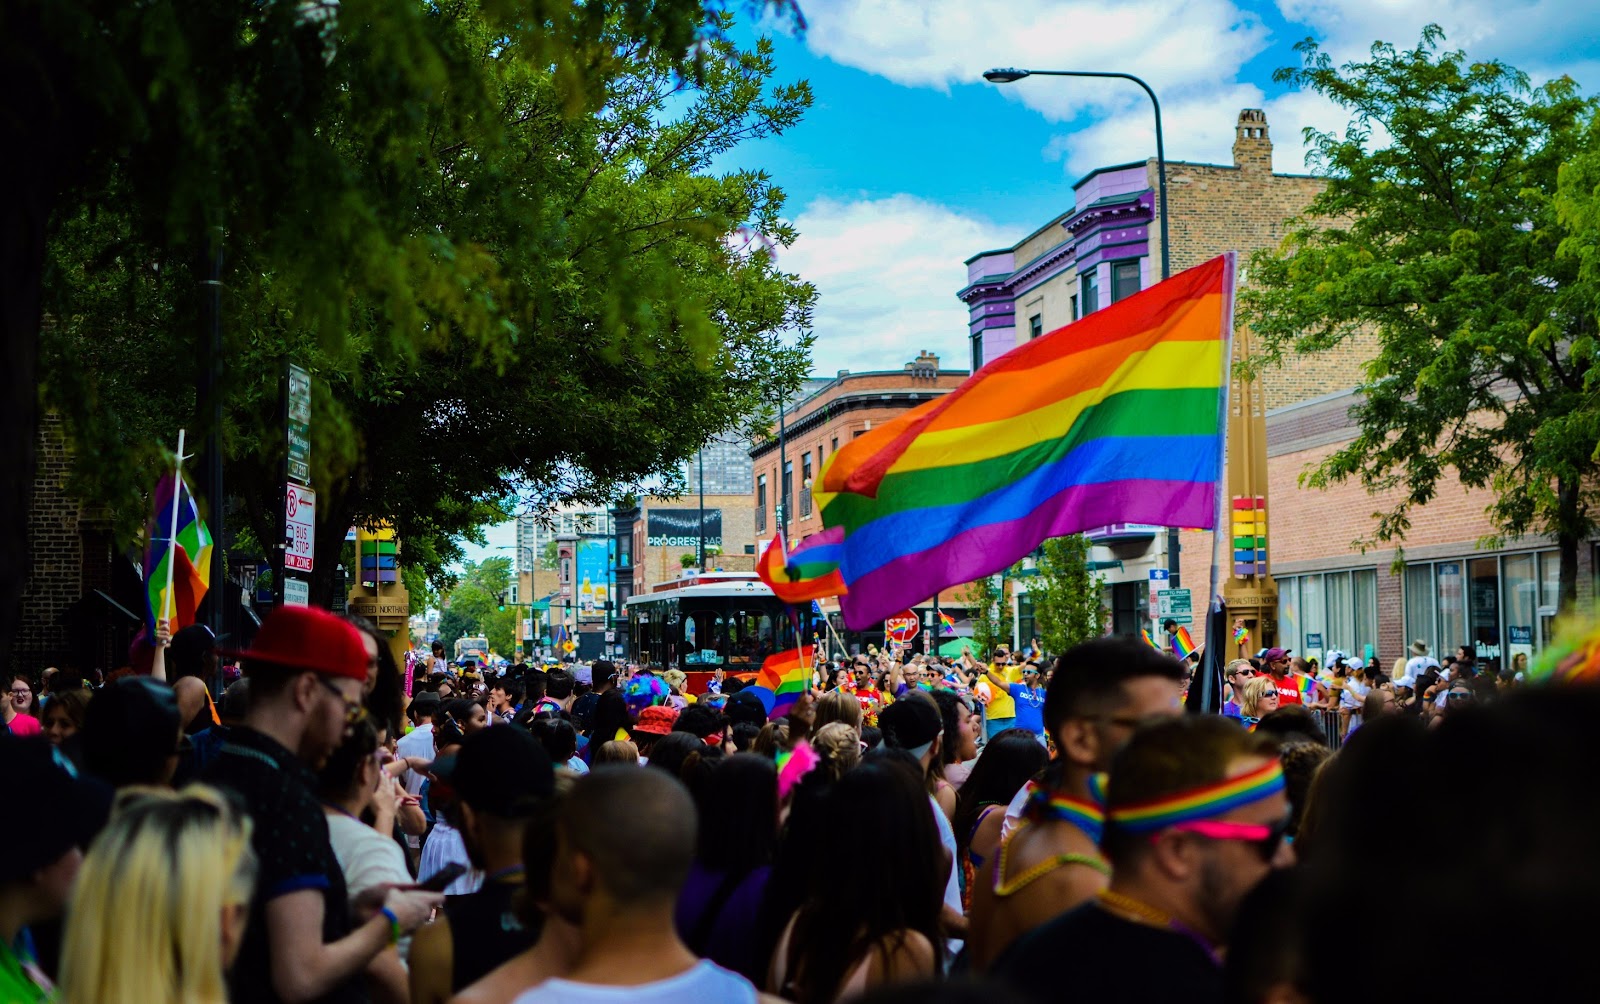 Protesters march in the street while holding rainbow flags.